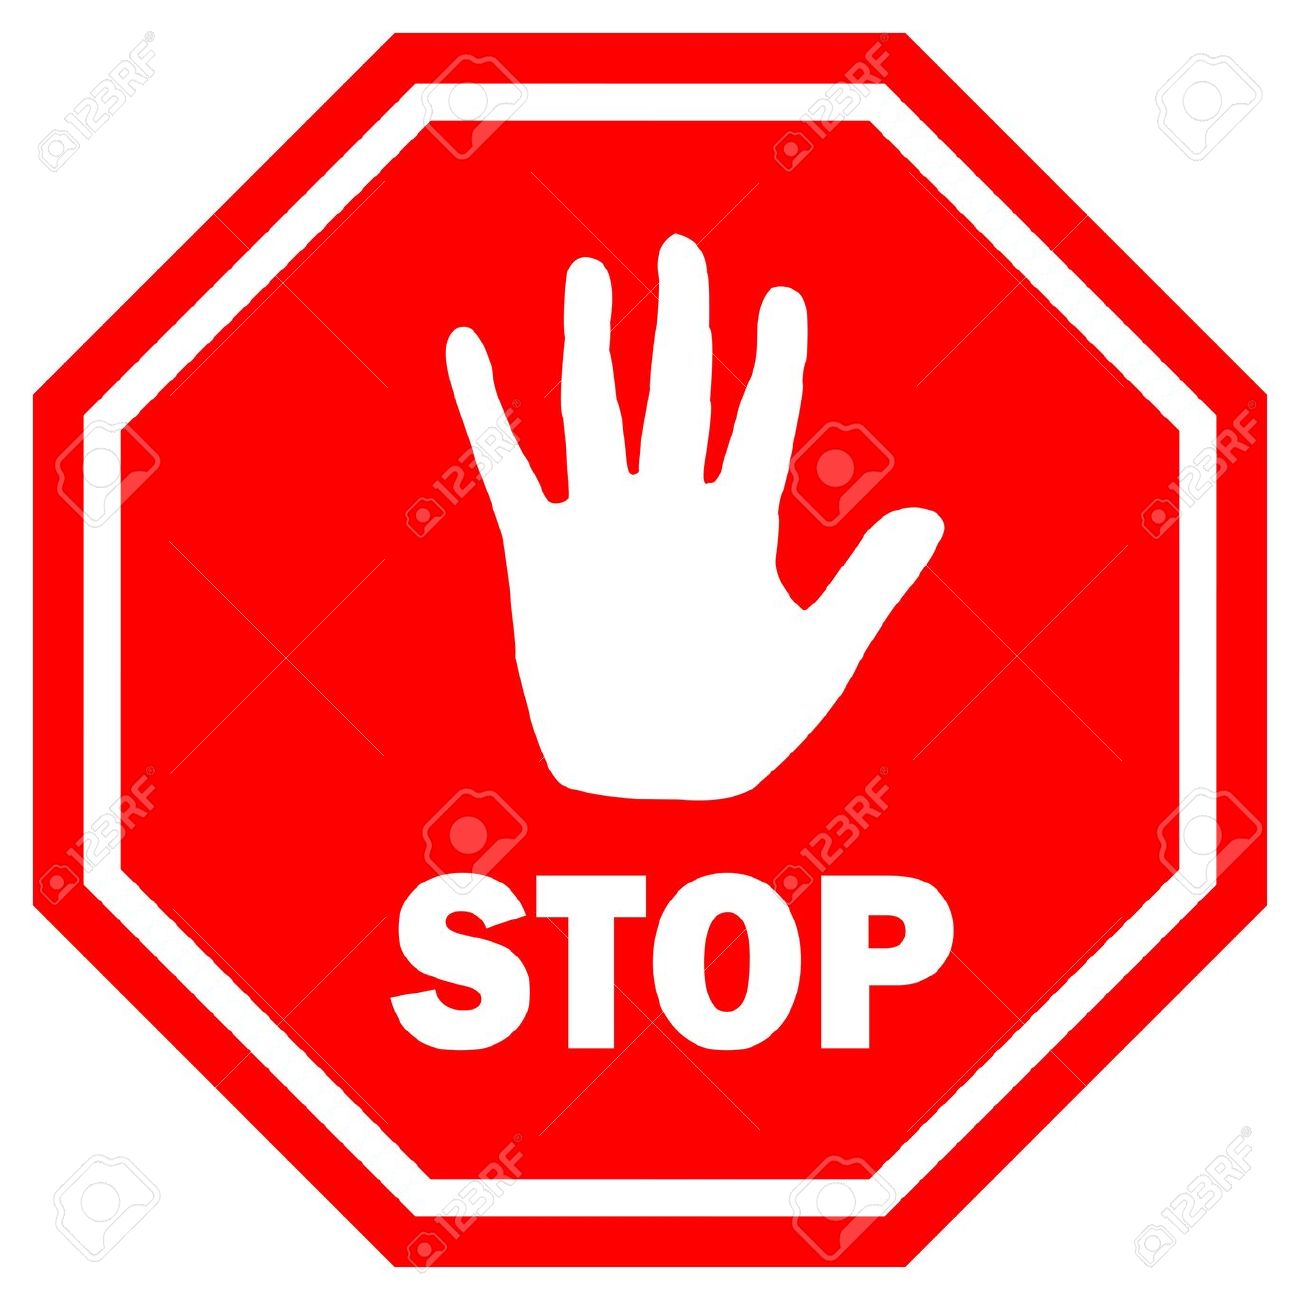 stop clipart - Stop Clipart